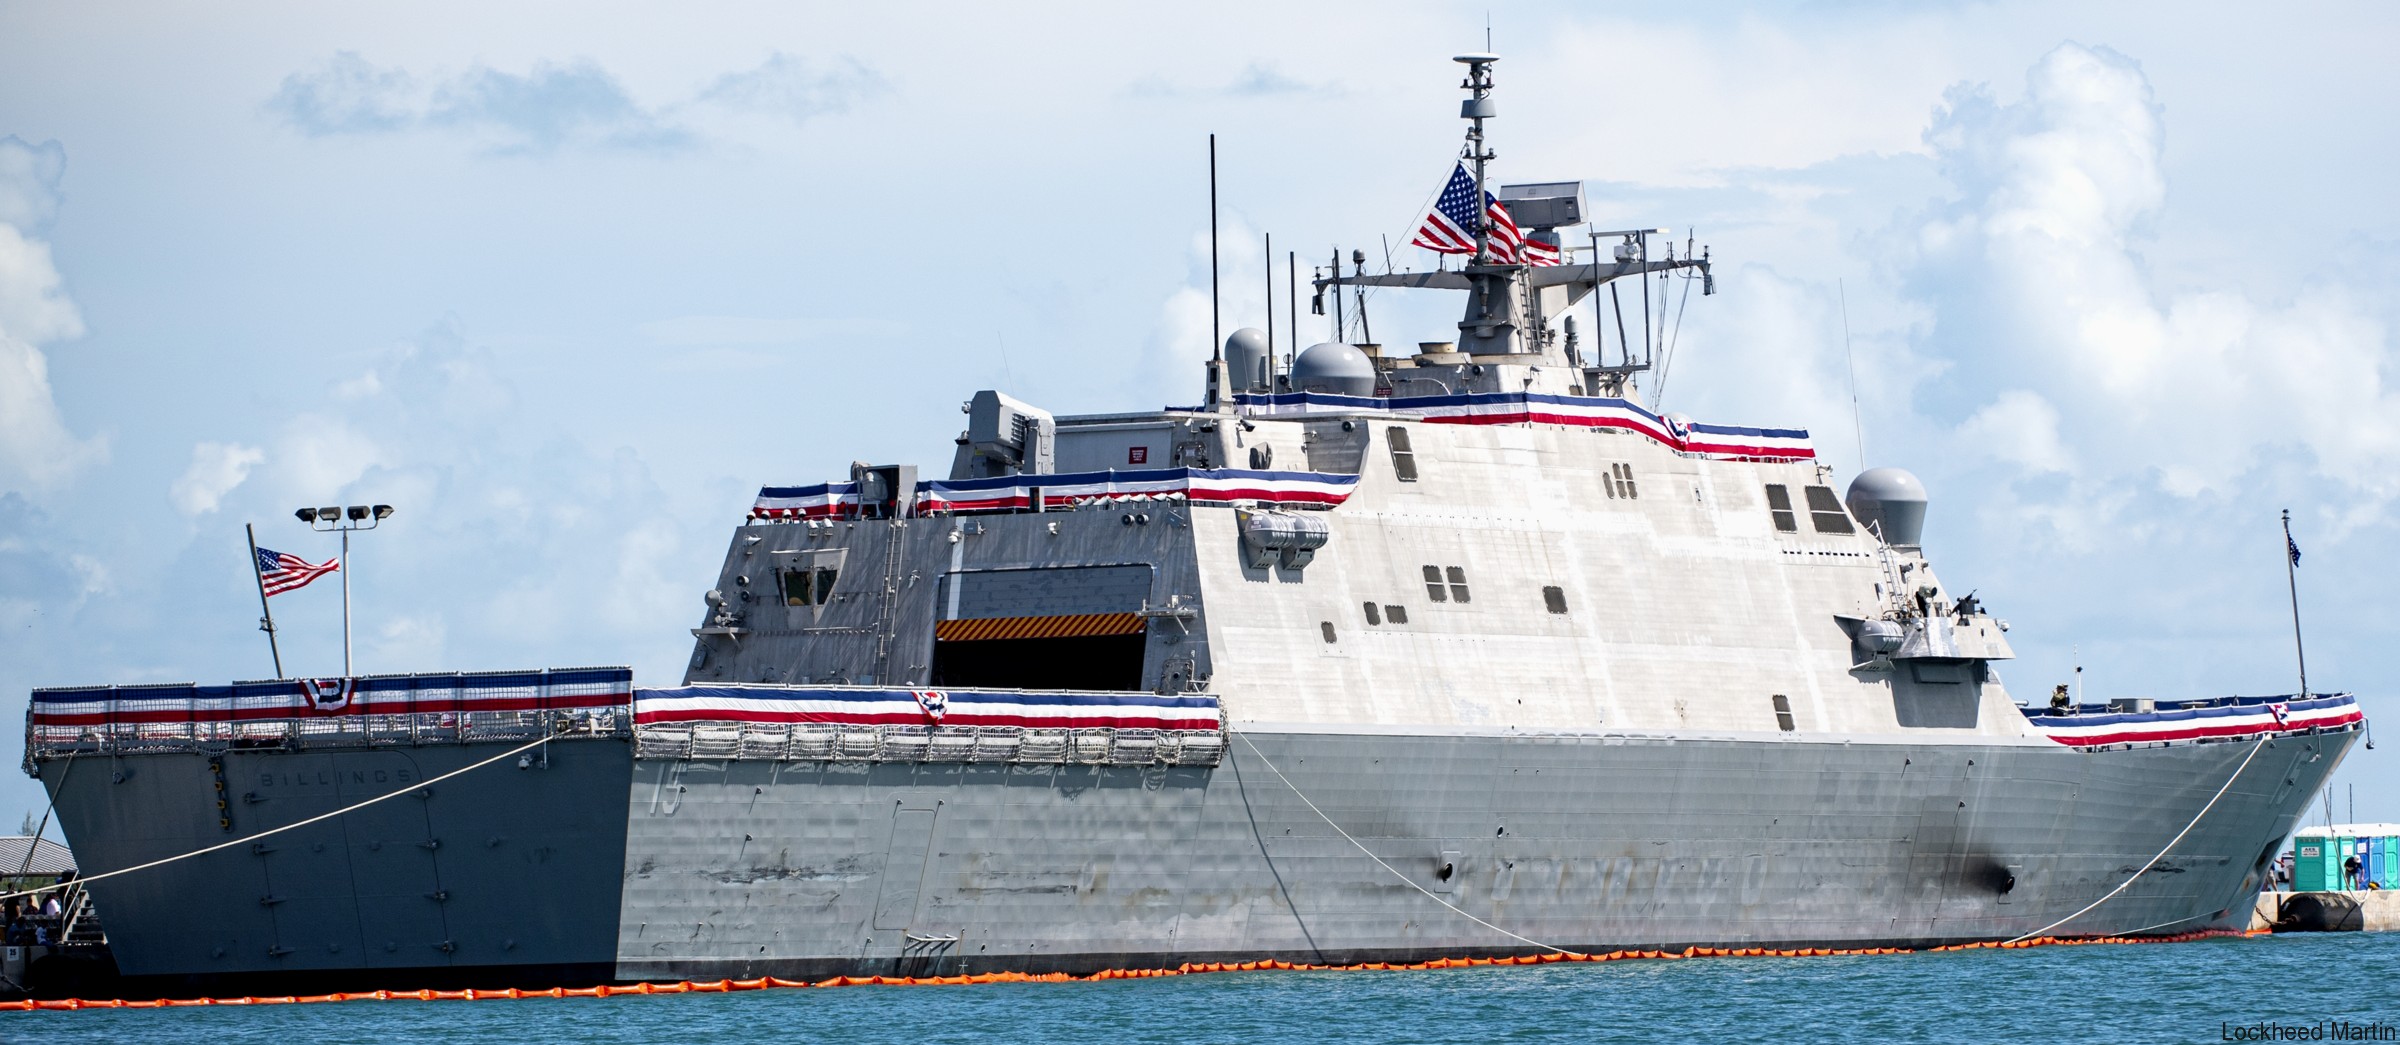 lcs-15 uss billings freedom class littoral combat ship us navy 10 commissioning key west florida